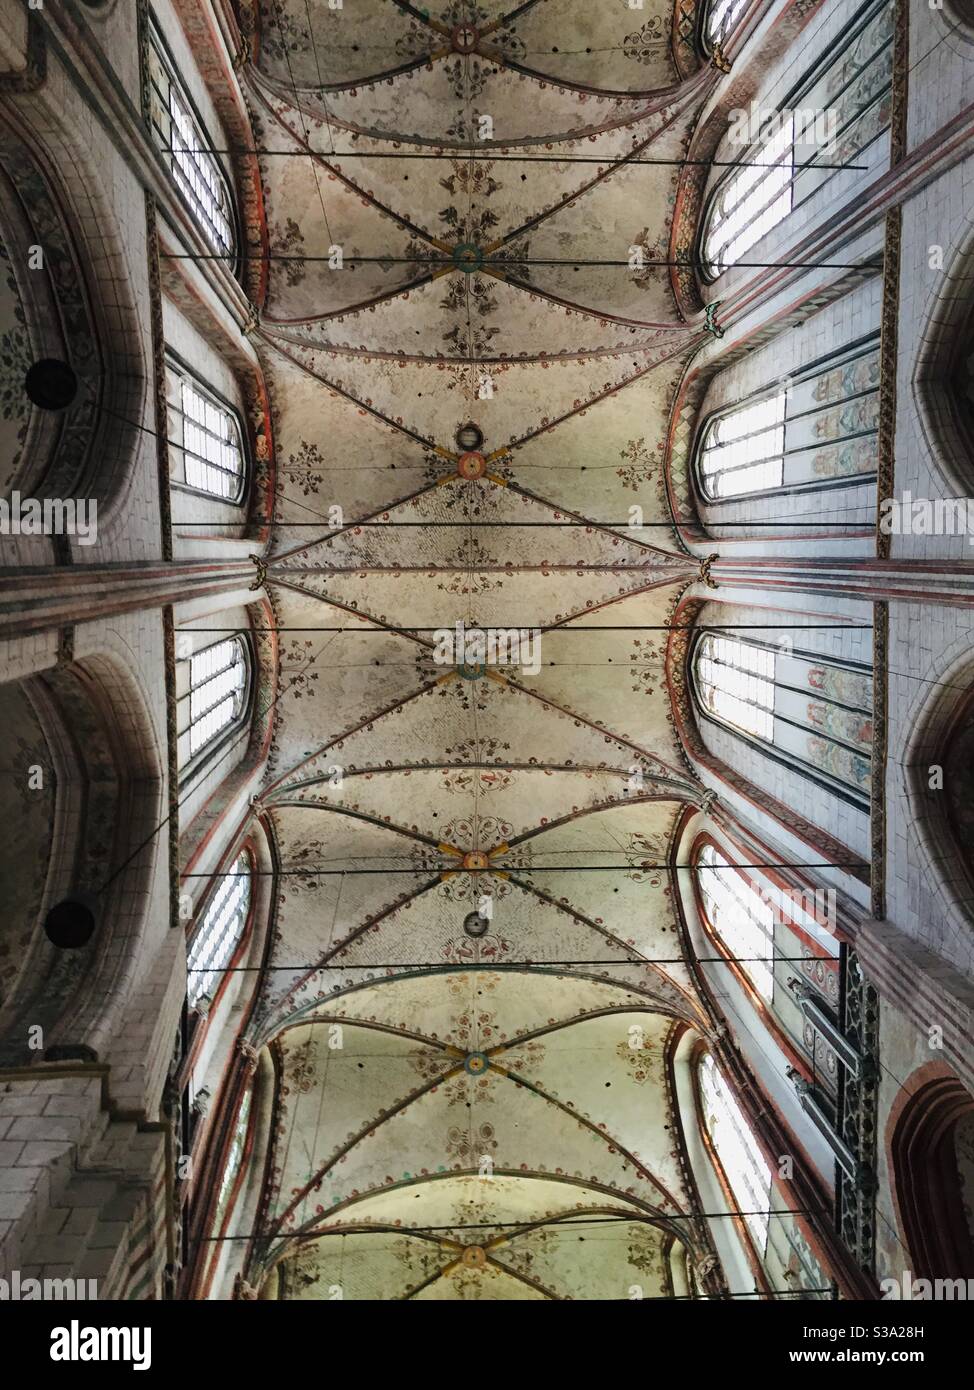 Arched ceiling of St Mary‘s church Lübeck, lower Saxony, Germany, with celestory Stock Photo